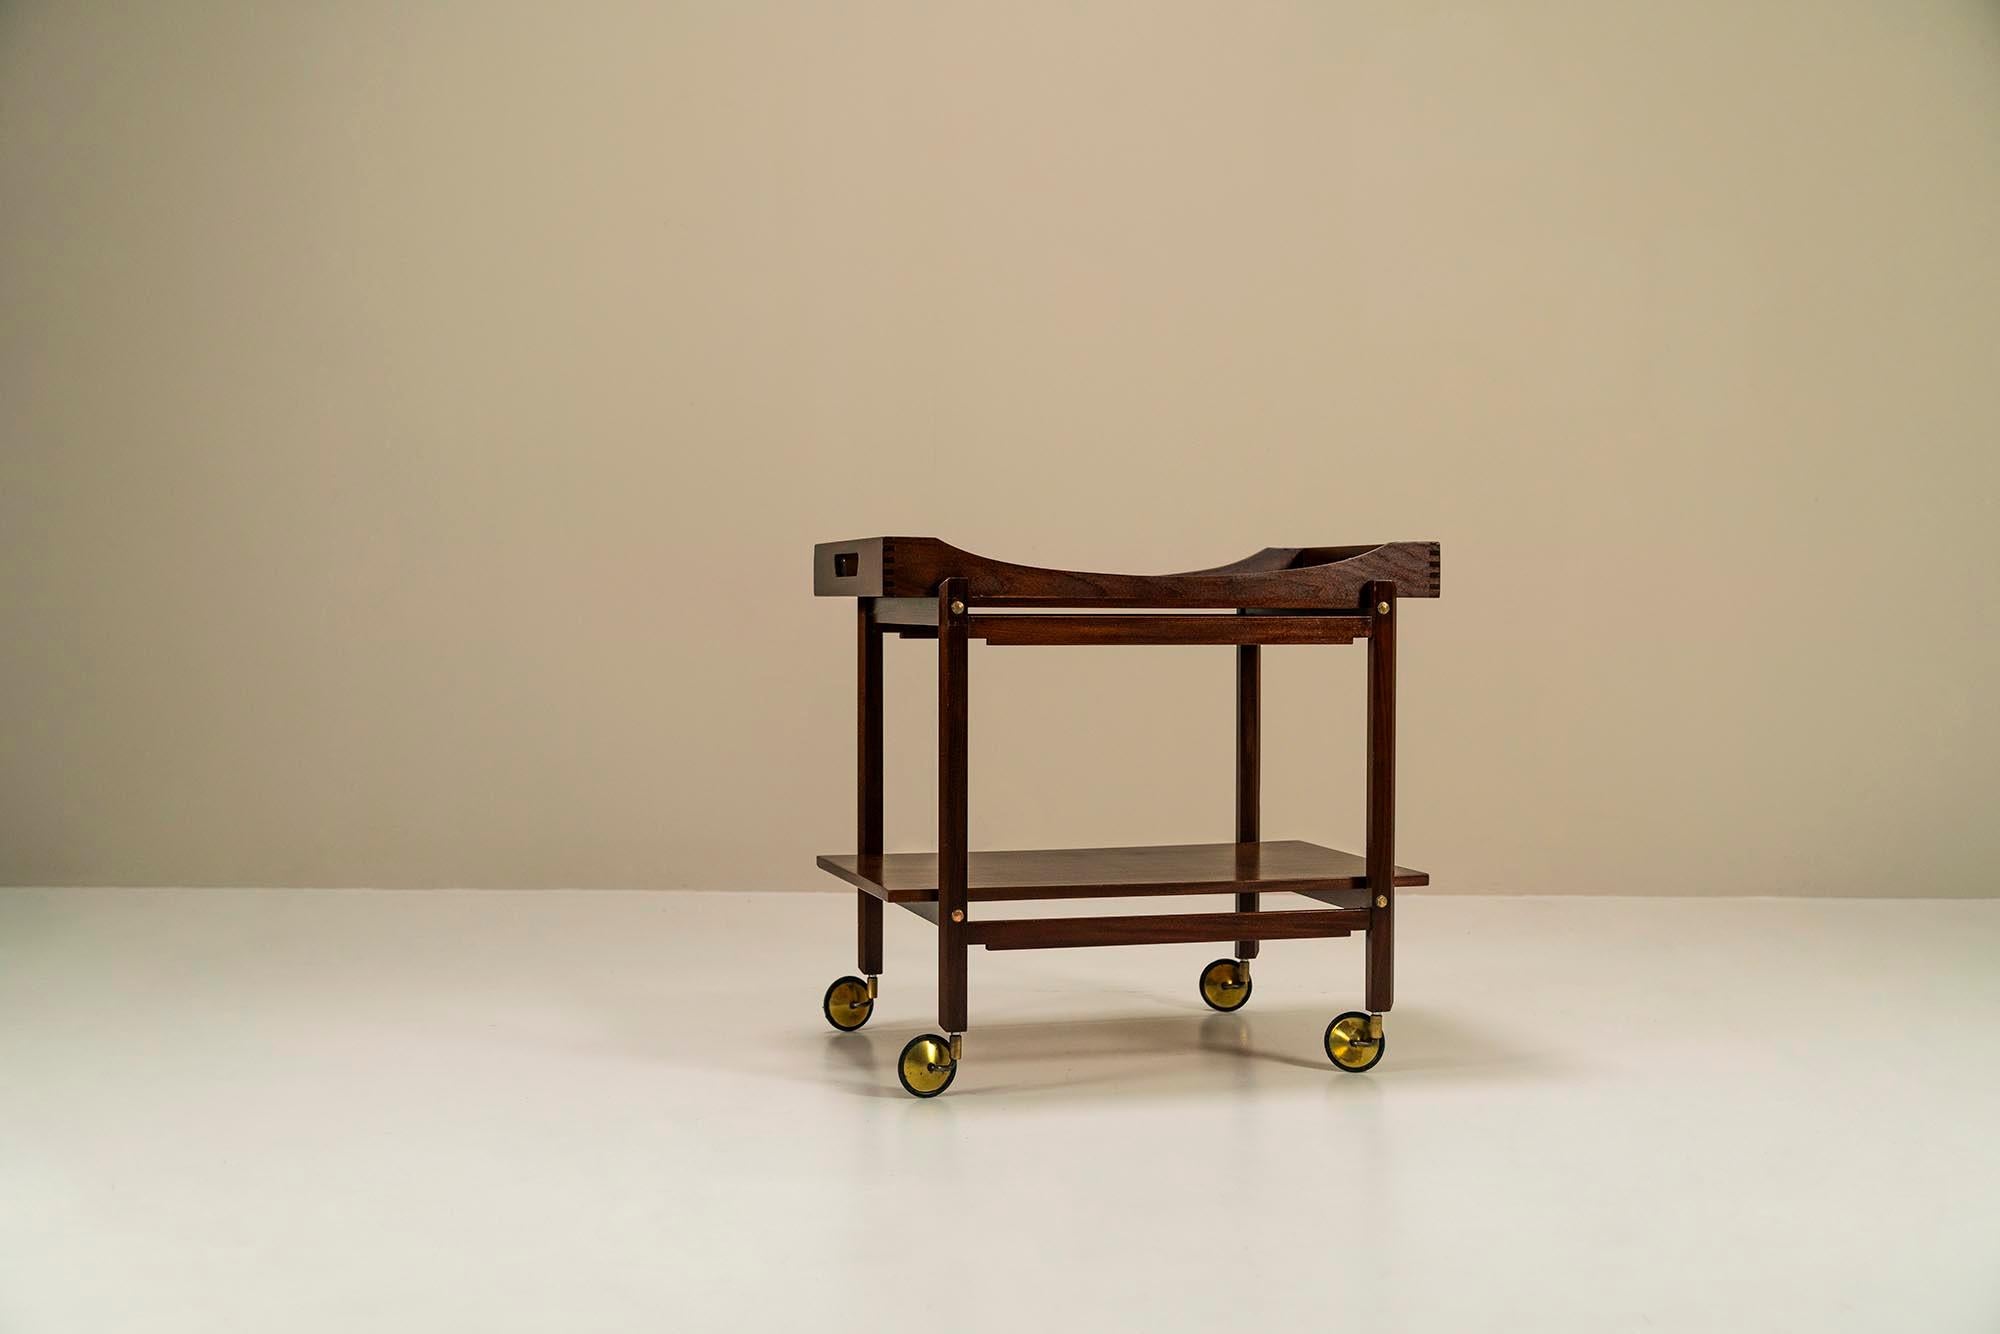 Trolley in solid wood finished with mahogany veneer.The practical function of the trolley, also called a serving trolley, is something from a bygone era, but the object itself has again won the hearts of the vintage design-loving public in recent